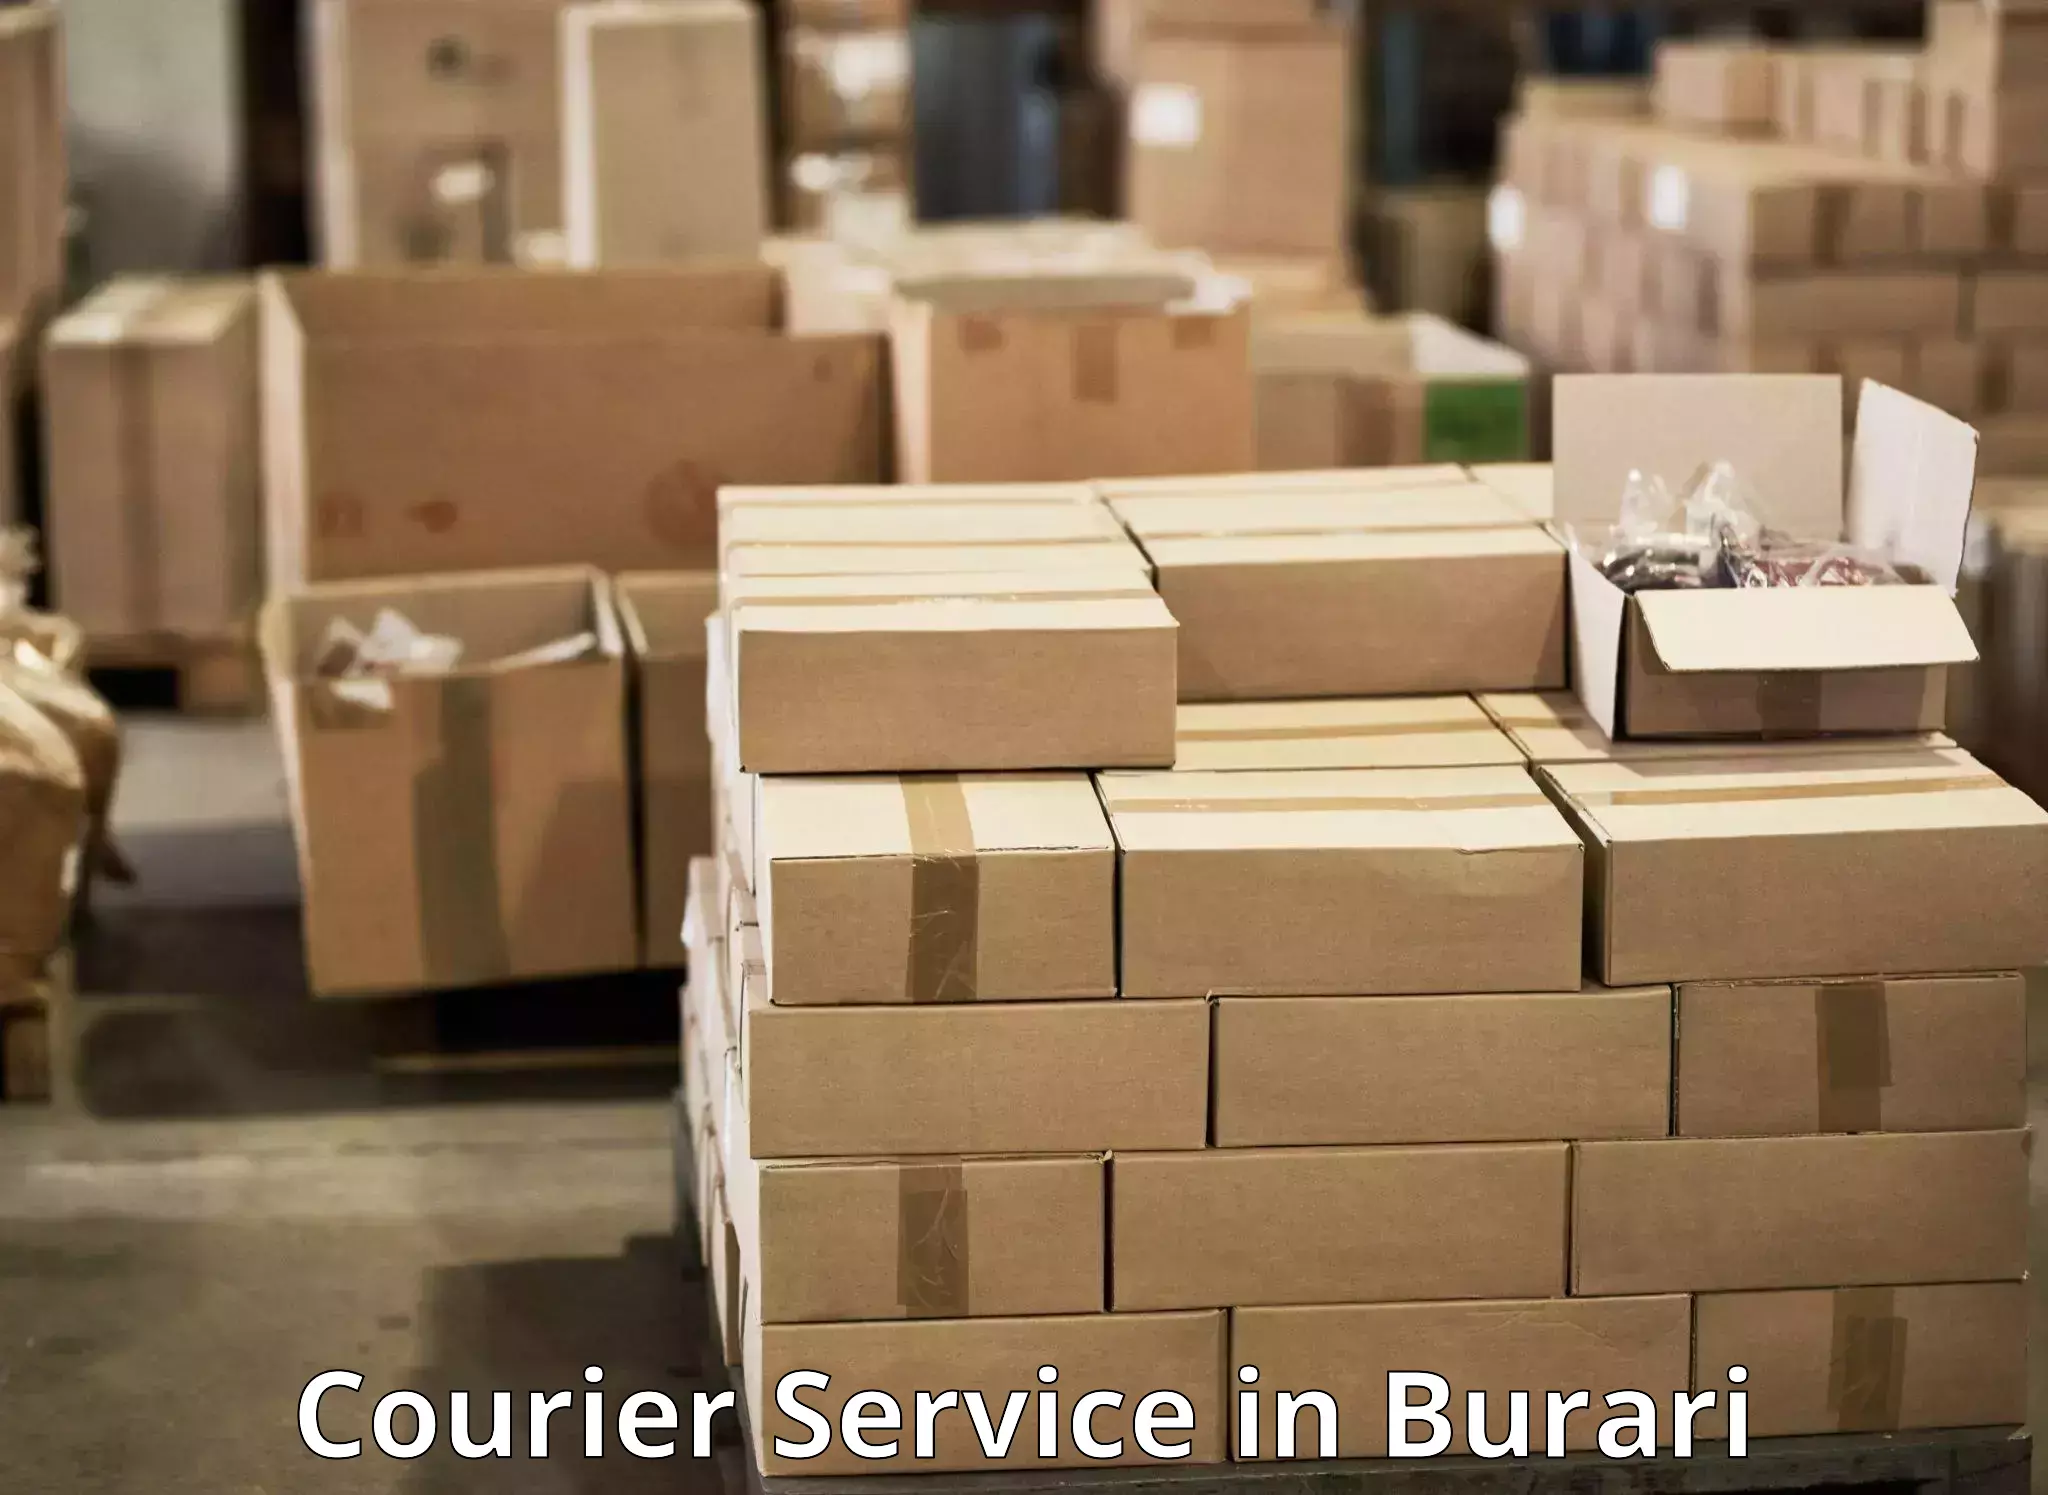 Fast shipping solutions in Burari